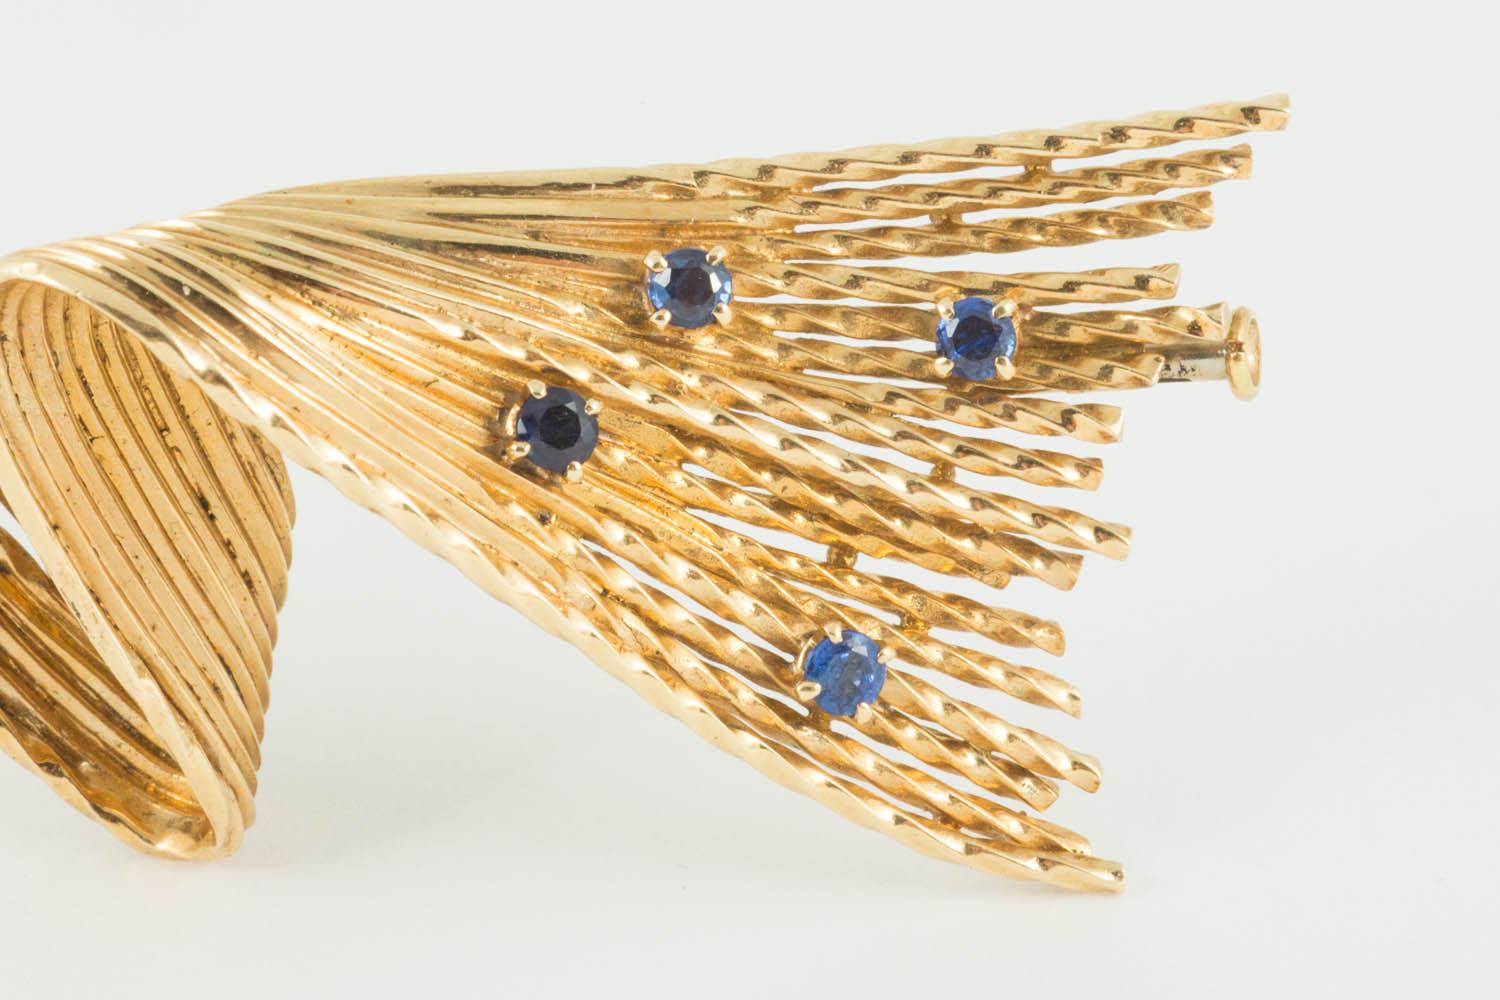 A vintage heavy quality 18 karat yellow gold brooch of abstract design and set with 5 sapphire collets. This  well made piece uses textured wirework lines linked together to give a twisted wave like appearance. French marks on the pin and signed